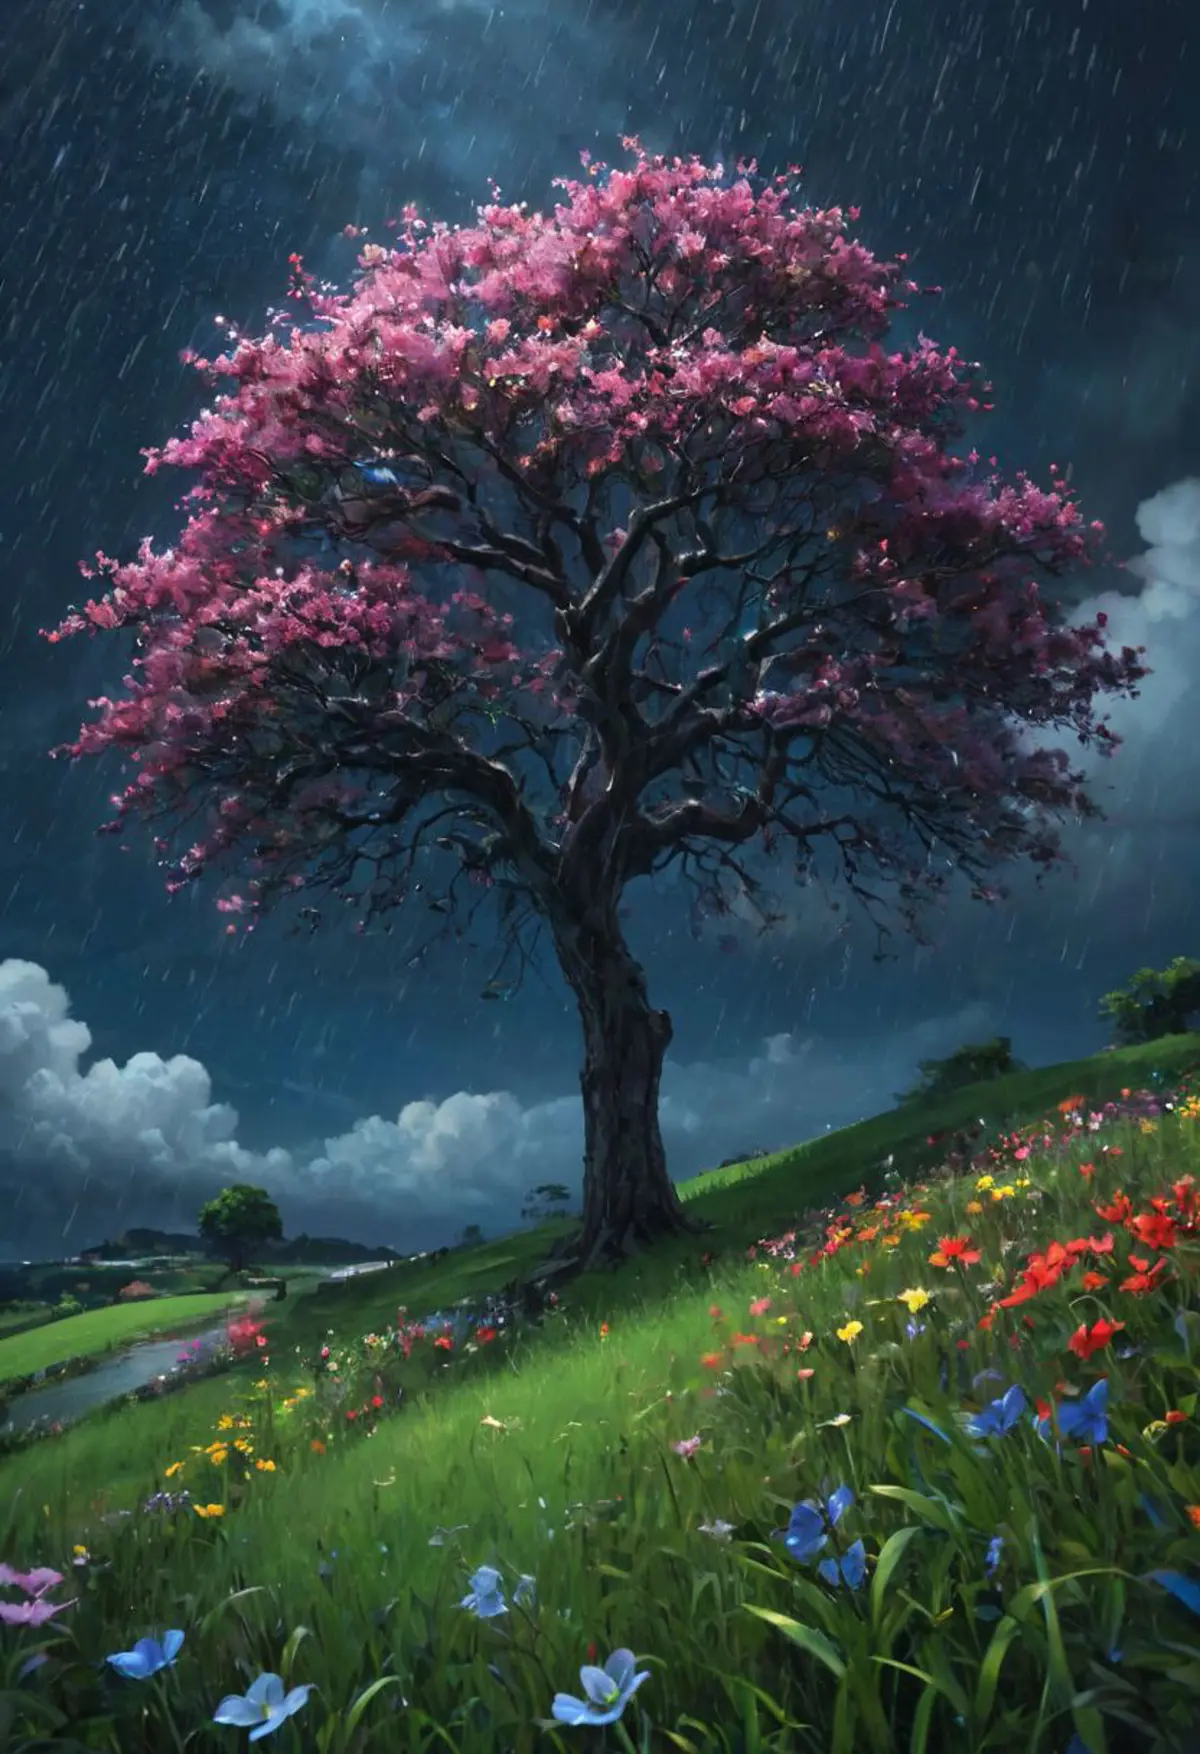 A solitary tree with pink blossoms standing tall on a slope against a stormy nocturnal sky. The ground is carpeted with green grass, sprinkled with colorful wildflowers.